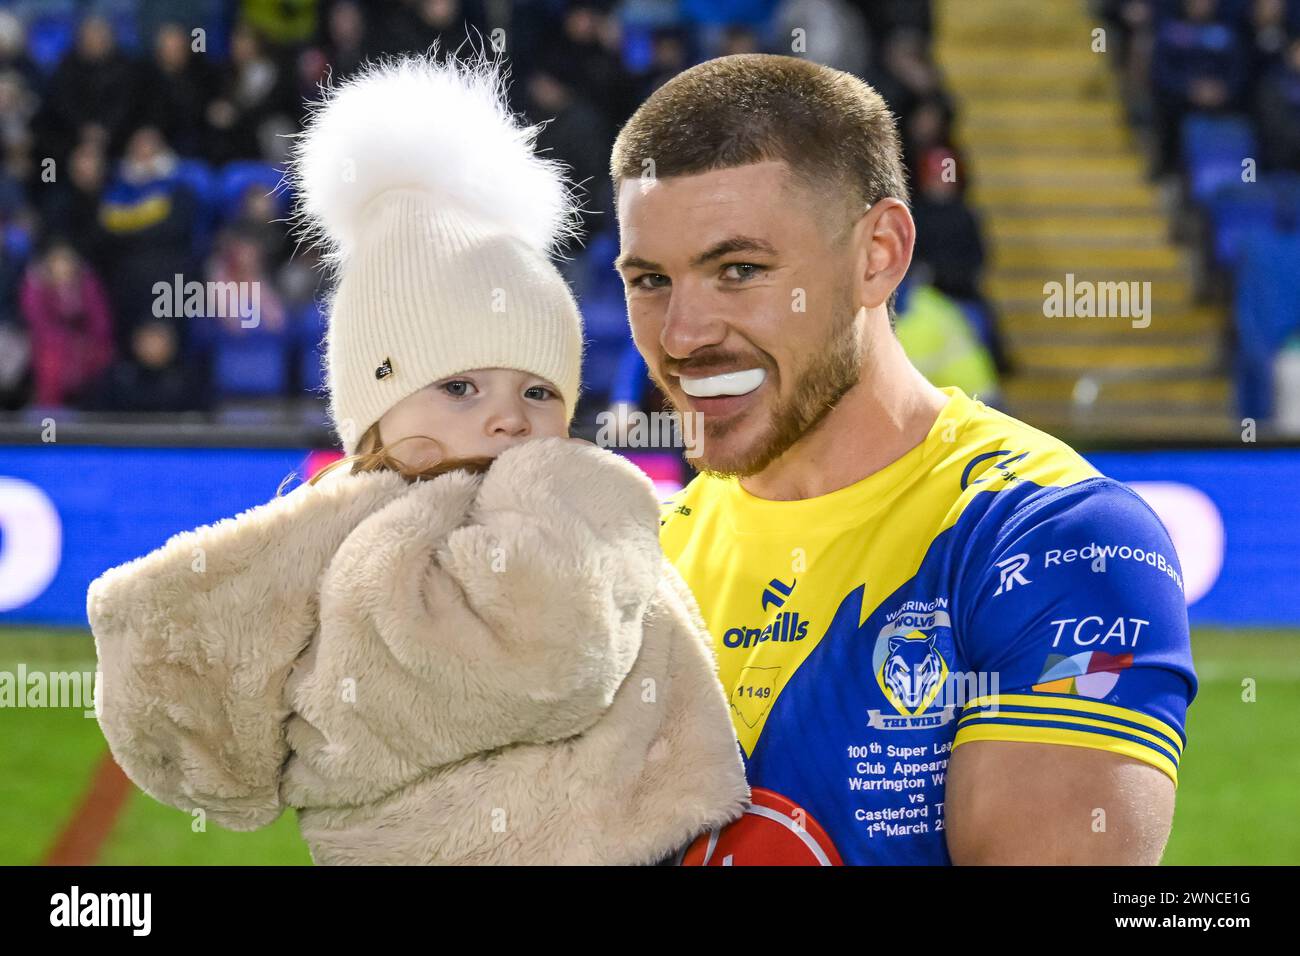 Danny Walker of Warrington Wolves ahead of the Betfred Super League Round 3 match Warrington Wolves vs Castleford Tigers at Halliwell Jones Stadium, Warrington, United Kingdom, 1st March 2024  (Photo by Craig Thomas/News Images) Stock Photo